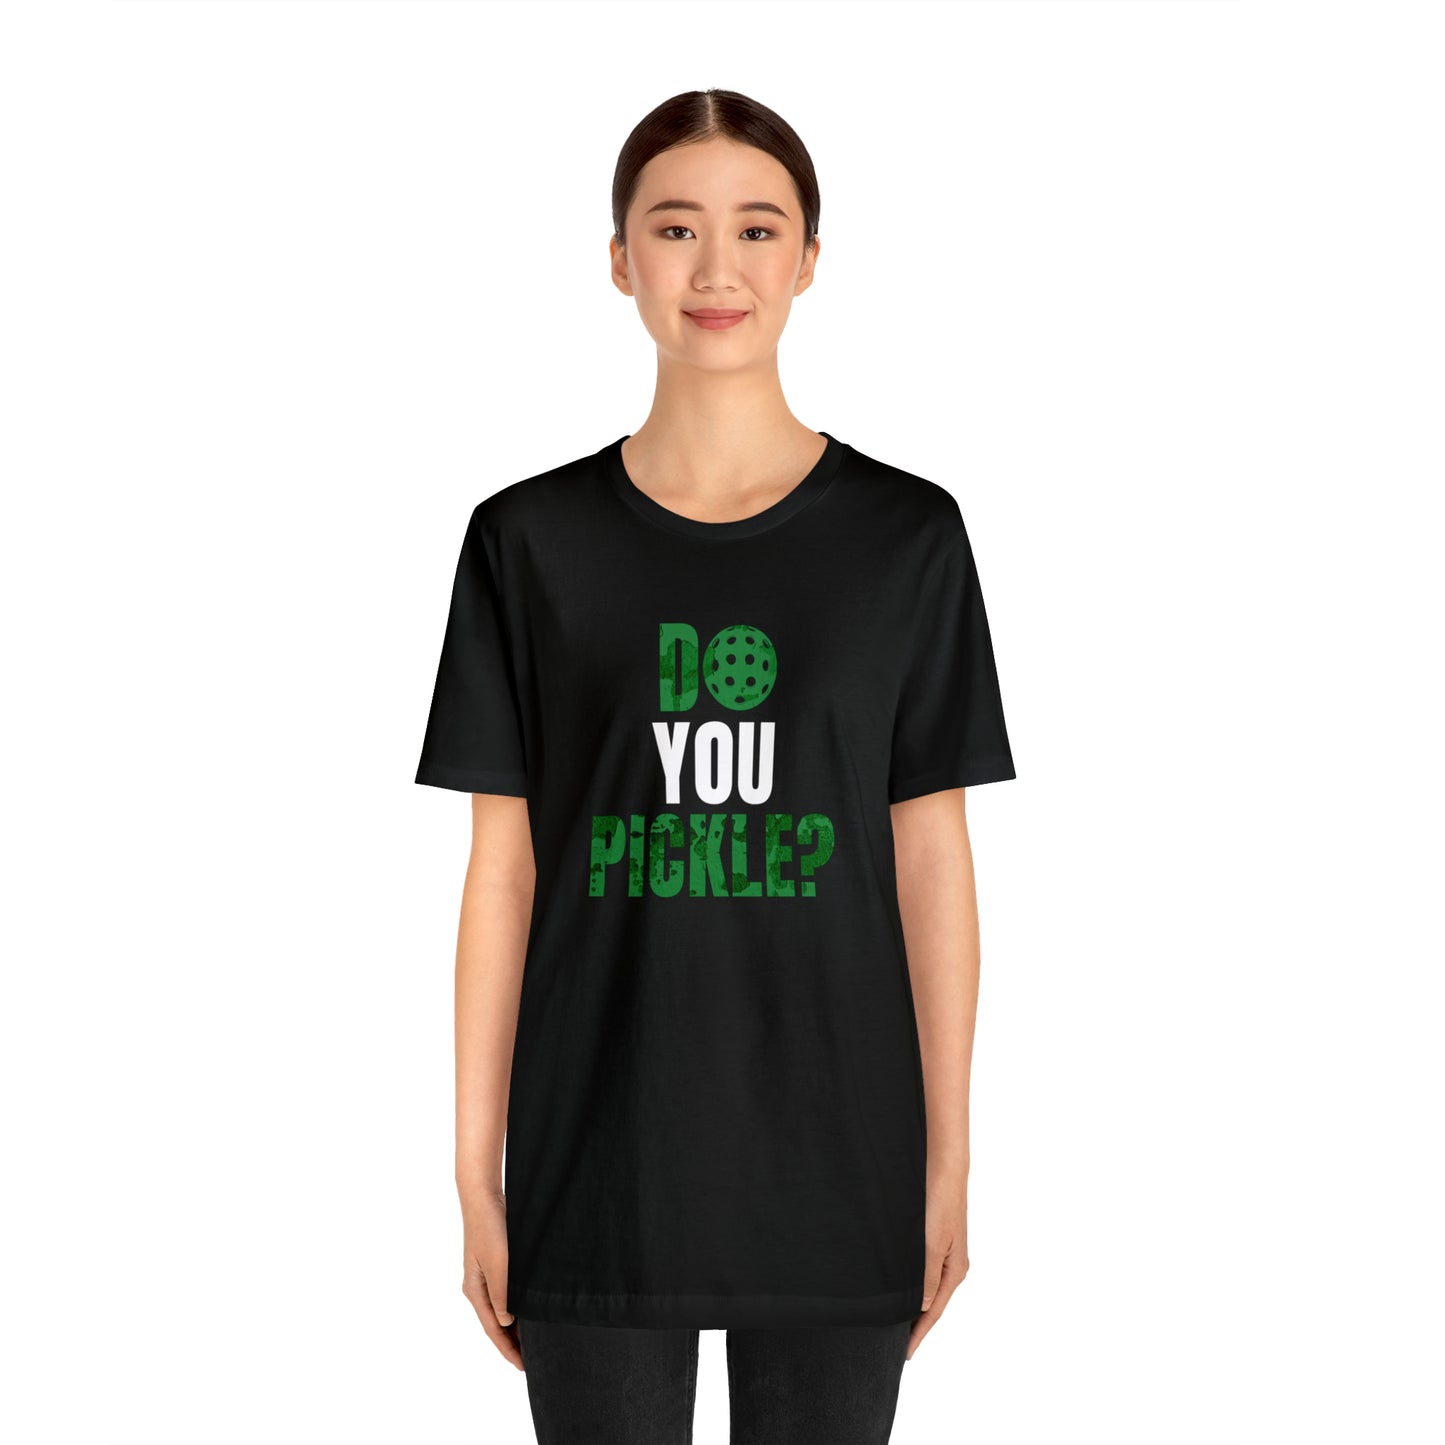 Do You Pickle? - Humorous Cotton T-Shirt for Pickleball Fans